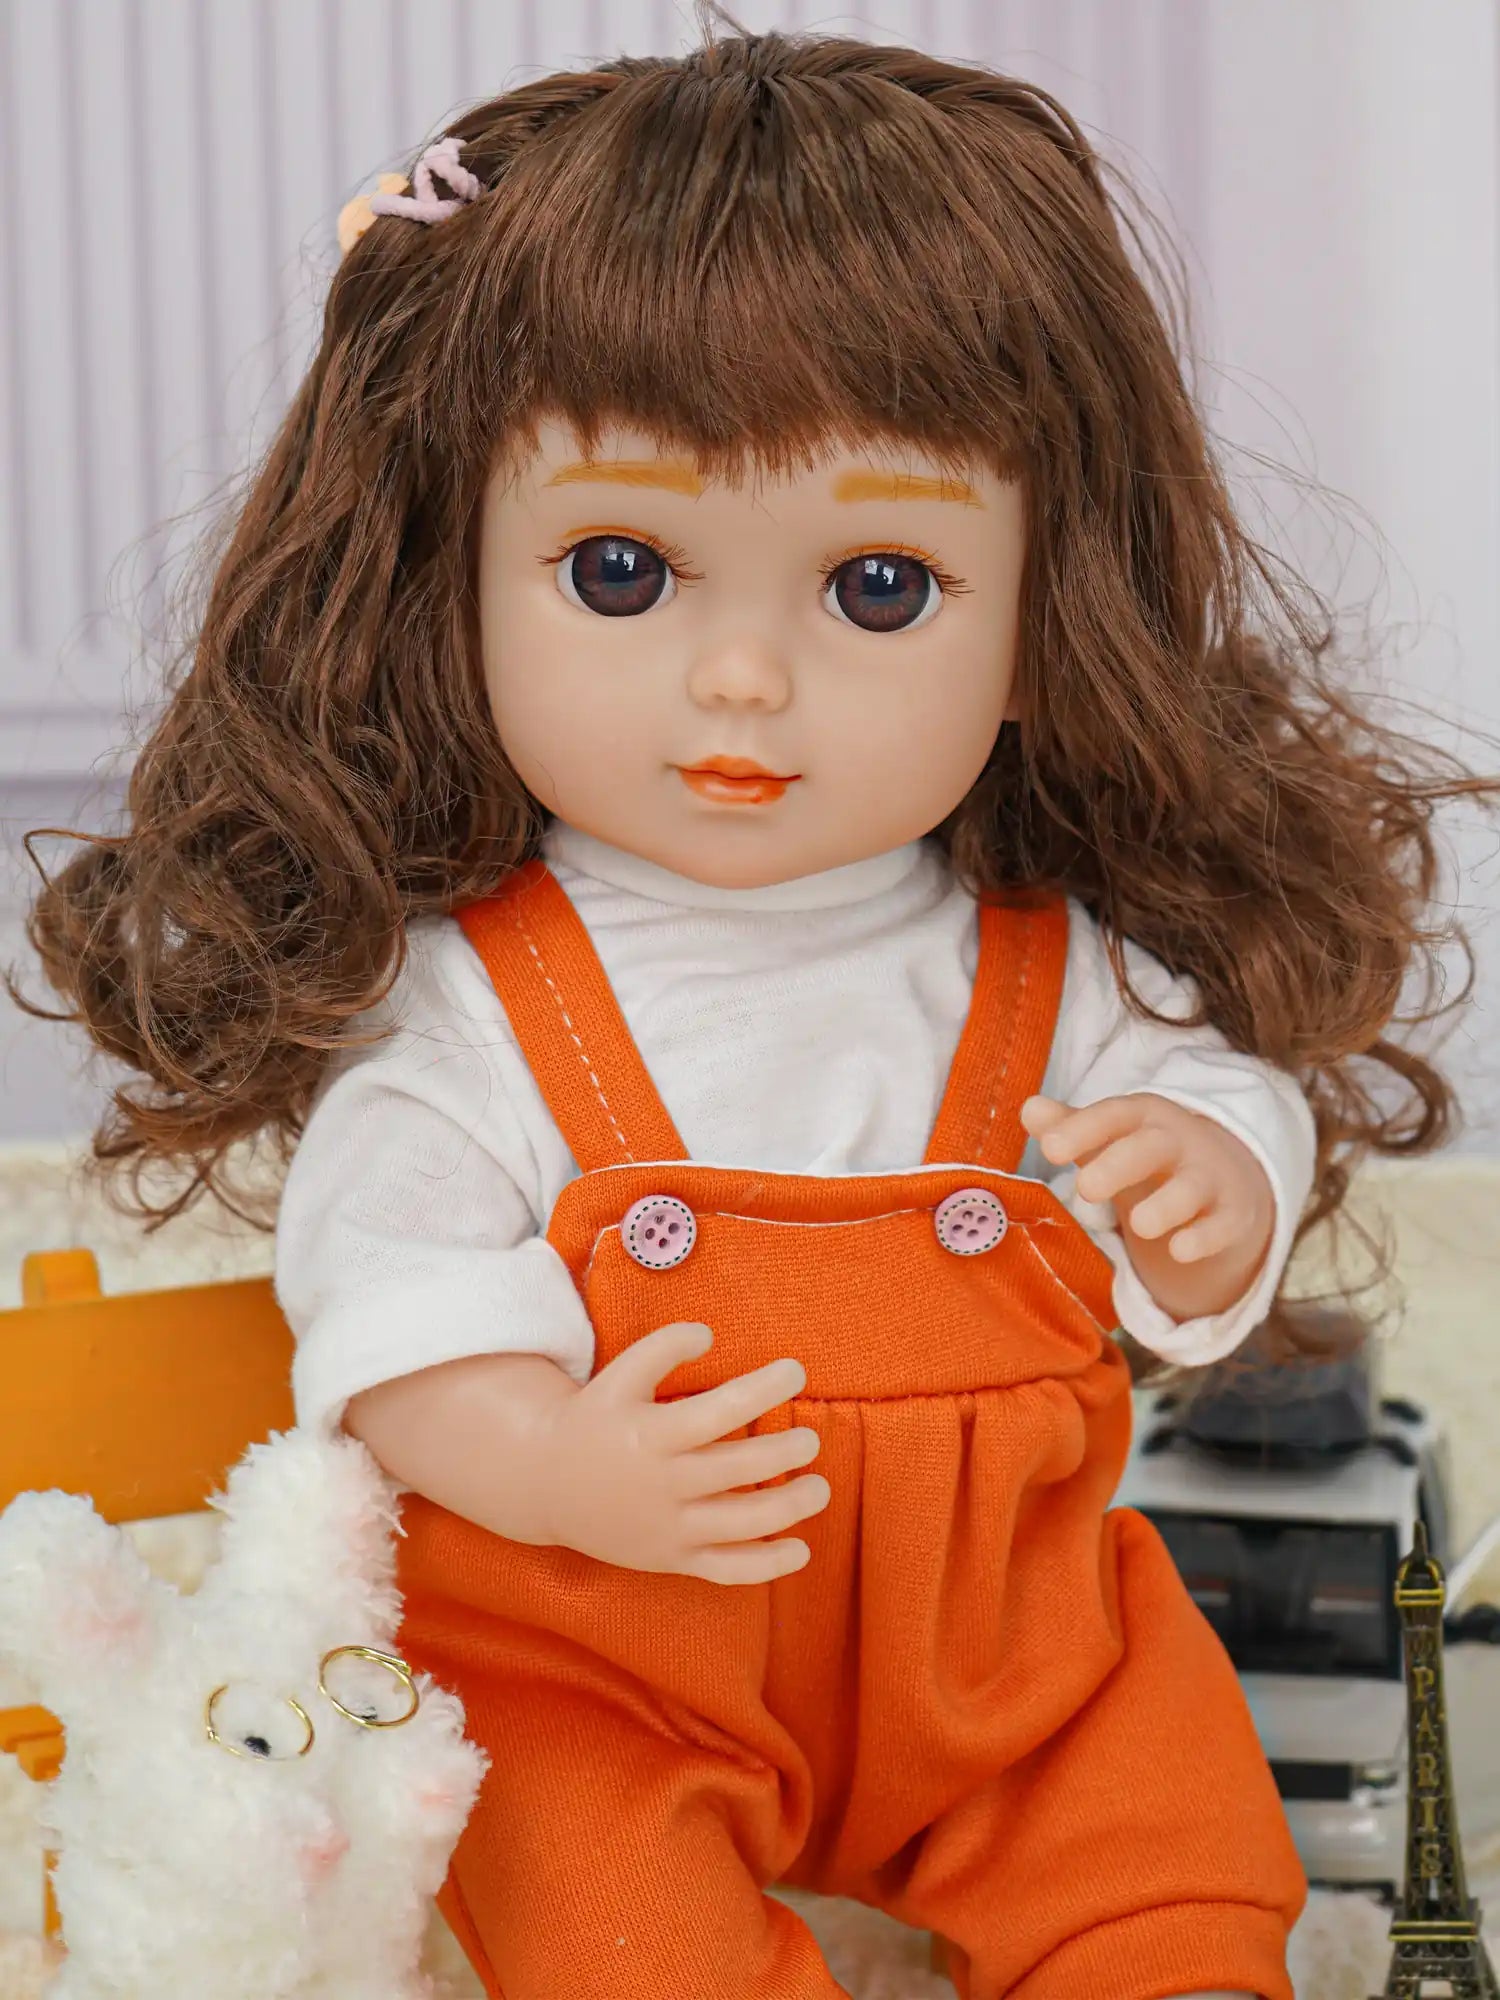 Doll in orange jumpsuit, sitting with a white plush dog and a toy camera.